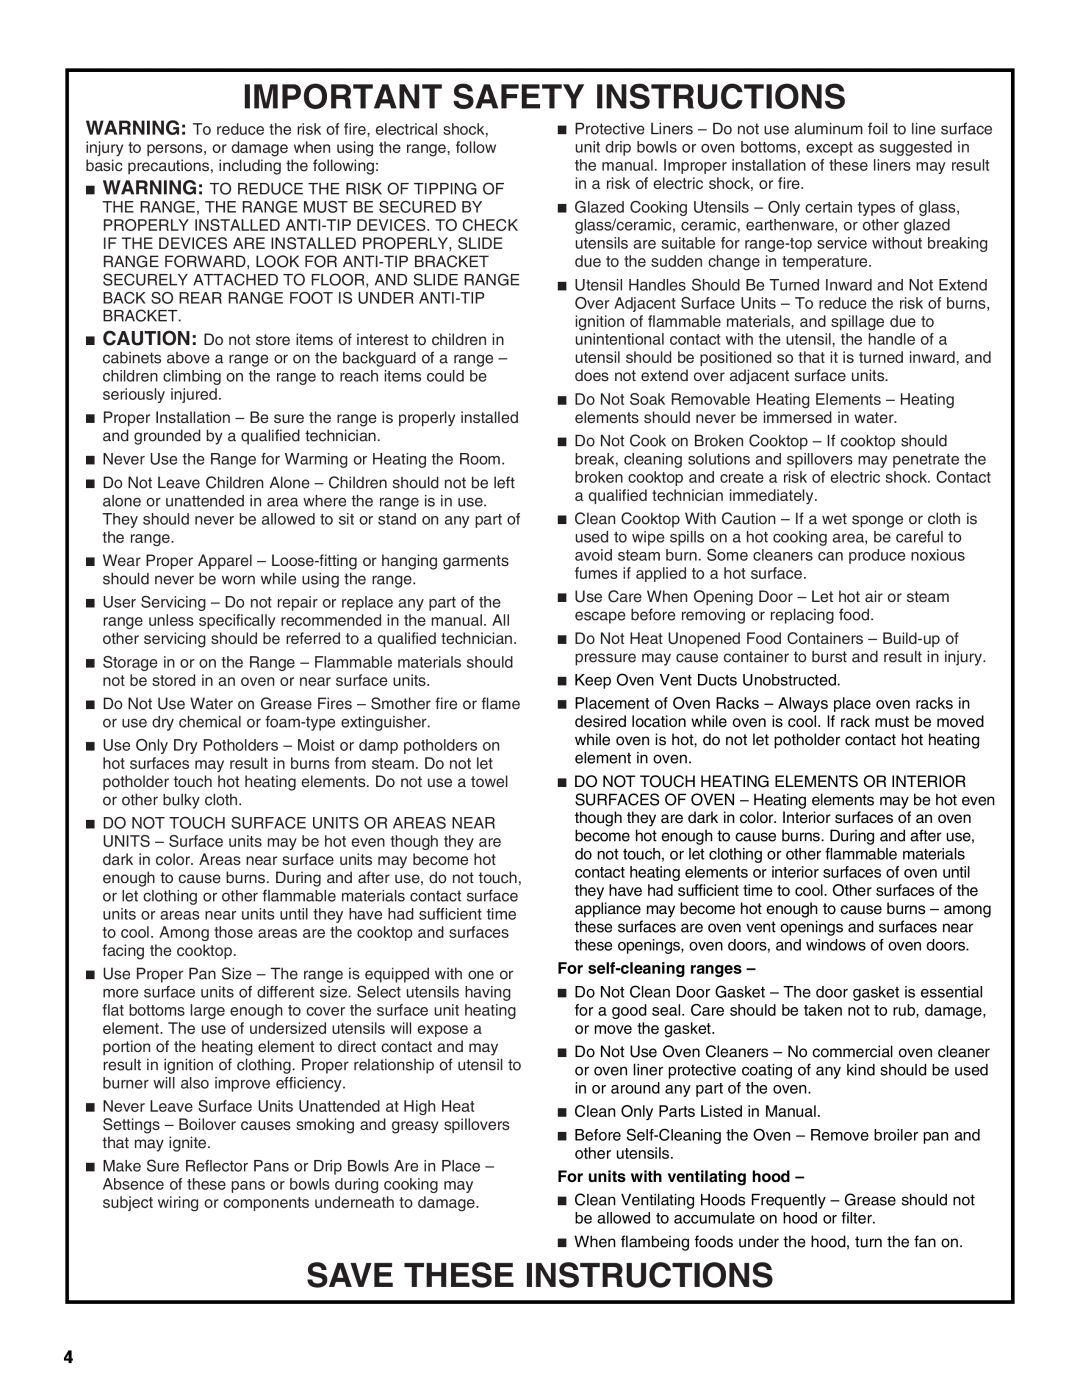 Whirlpool W10017710 manual Important Safety Instructions, Save These Instructions, For self-cleaning ranges 